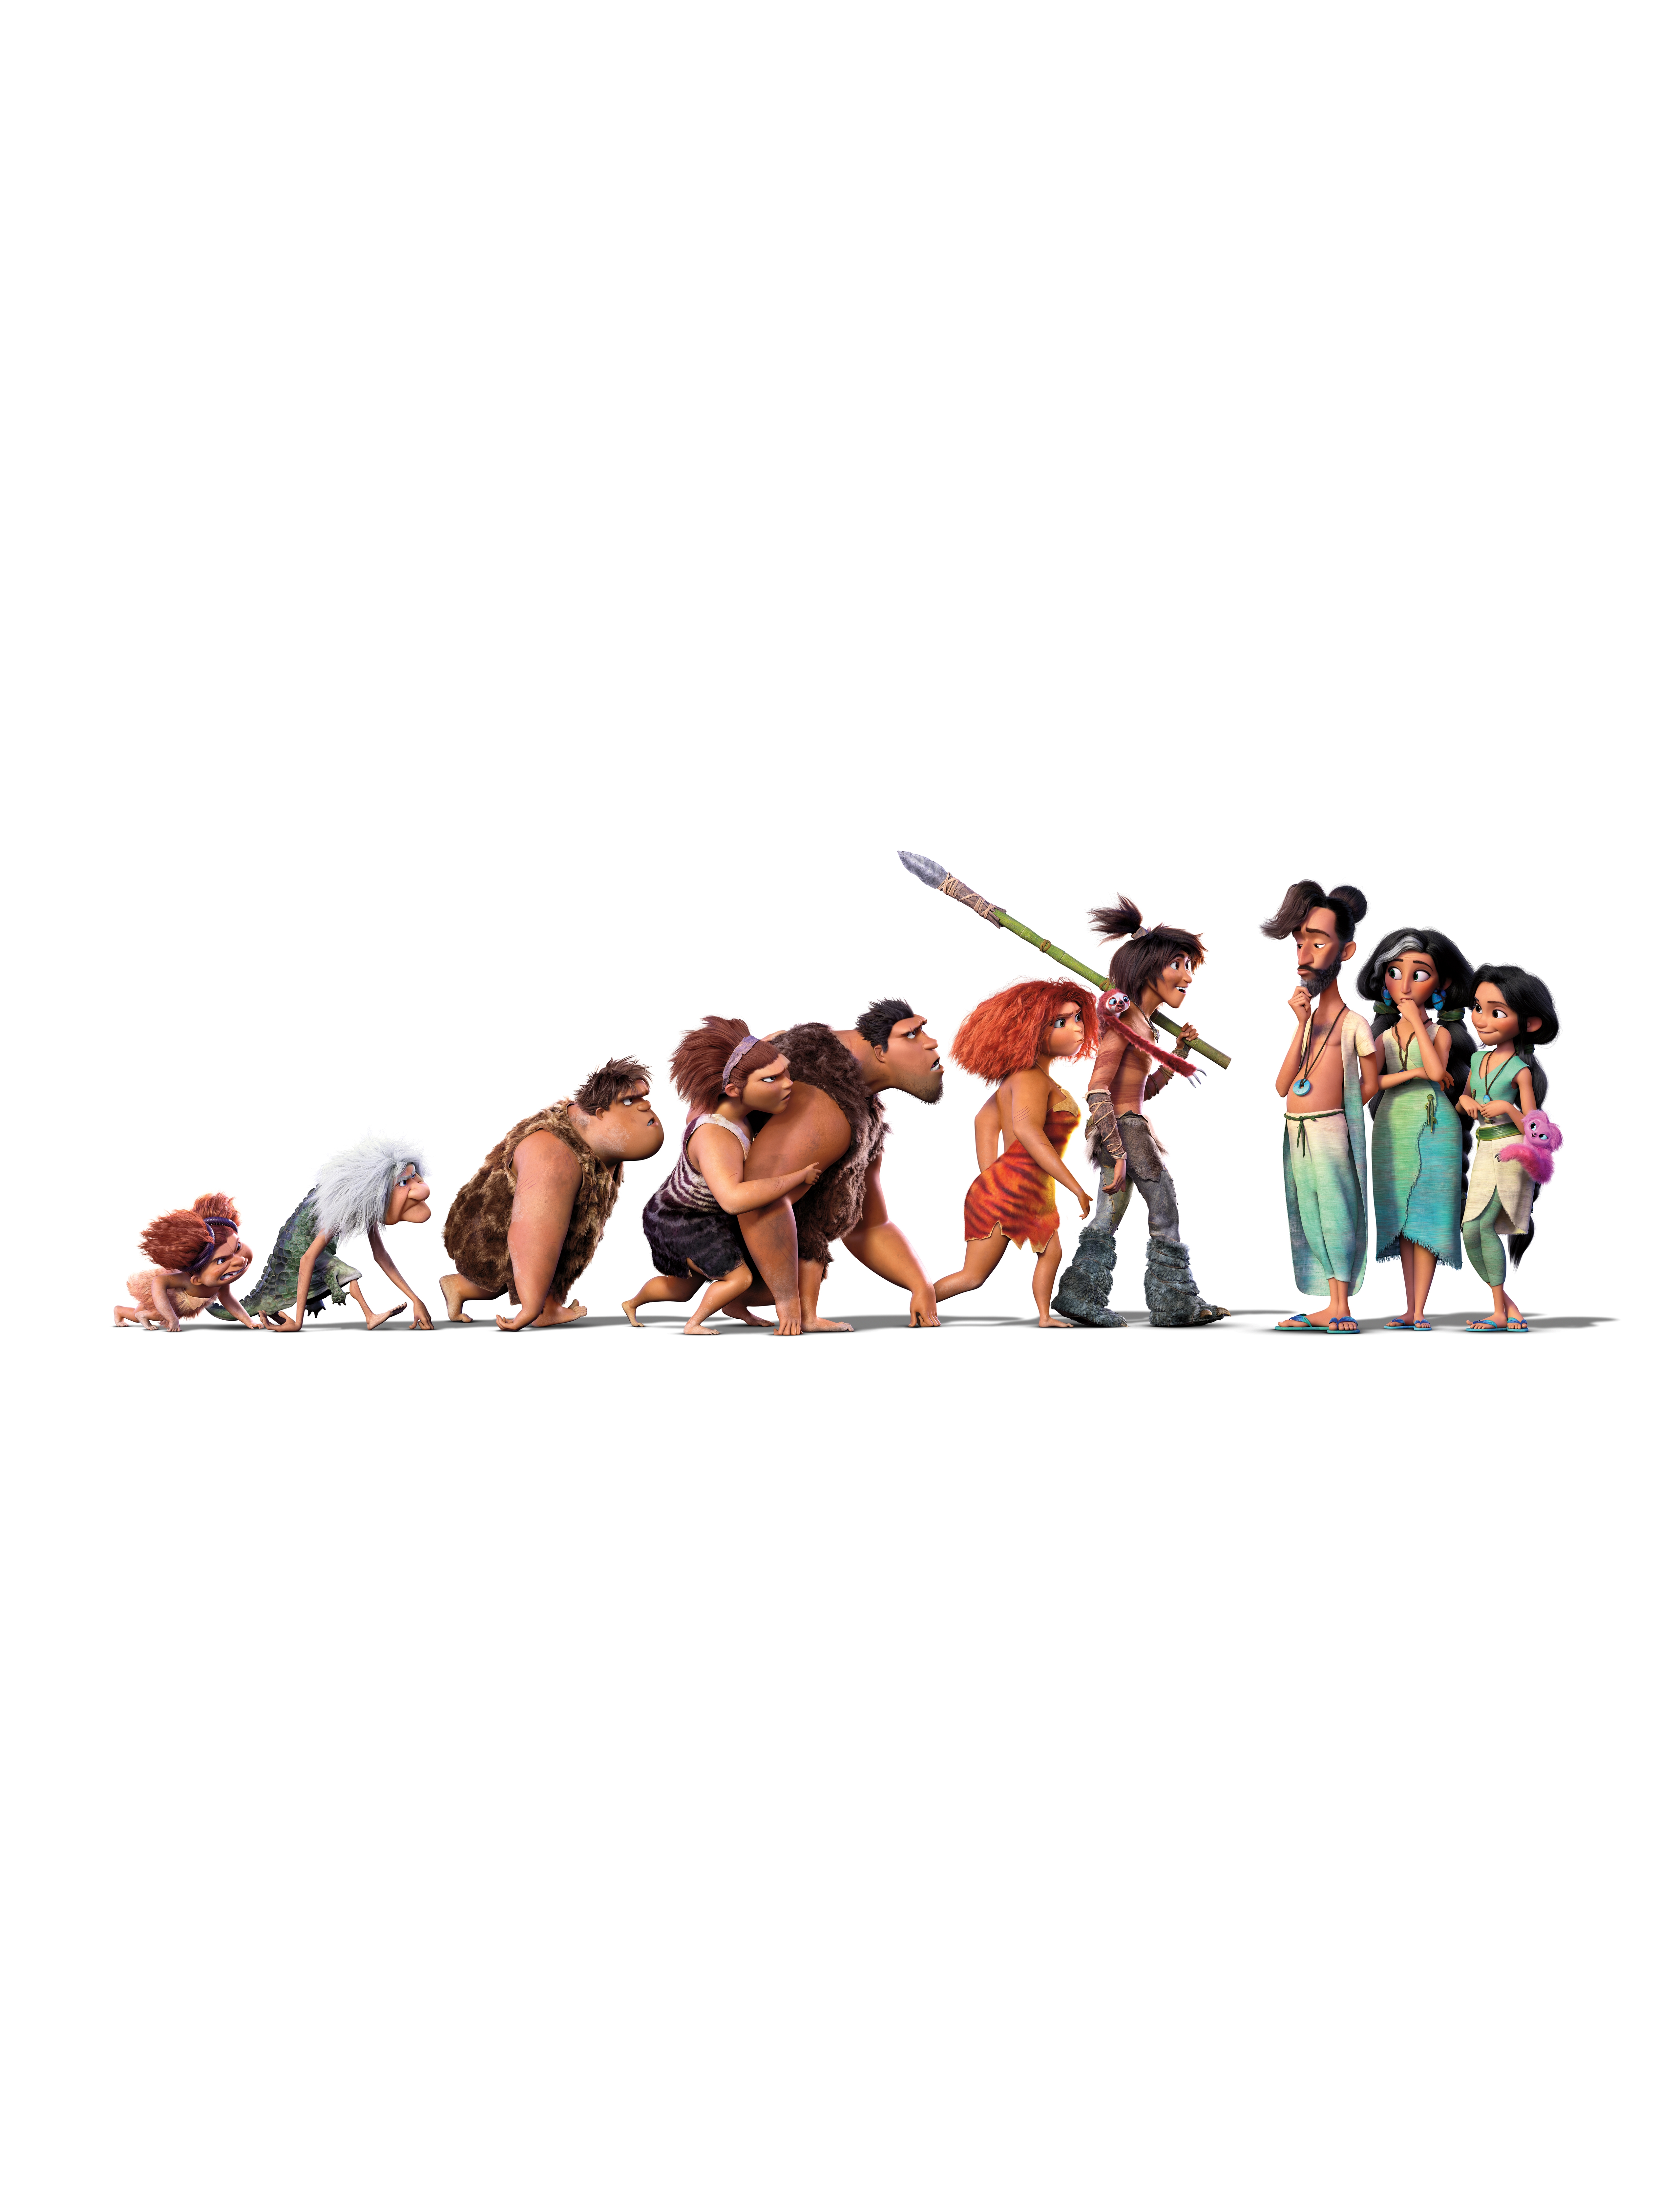 HD wallpaper, The Croods 2, Animation, 2020 Movies